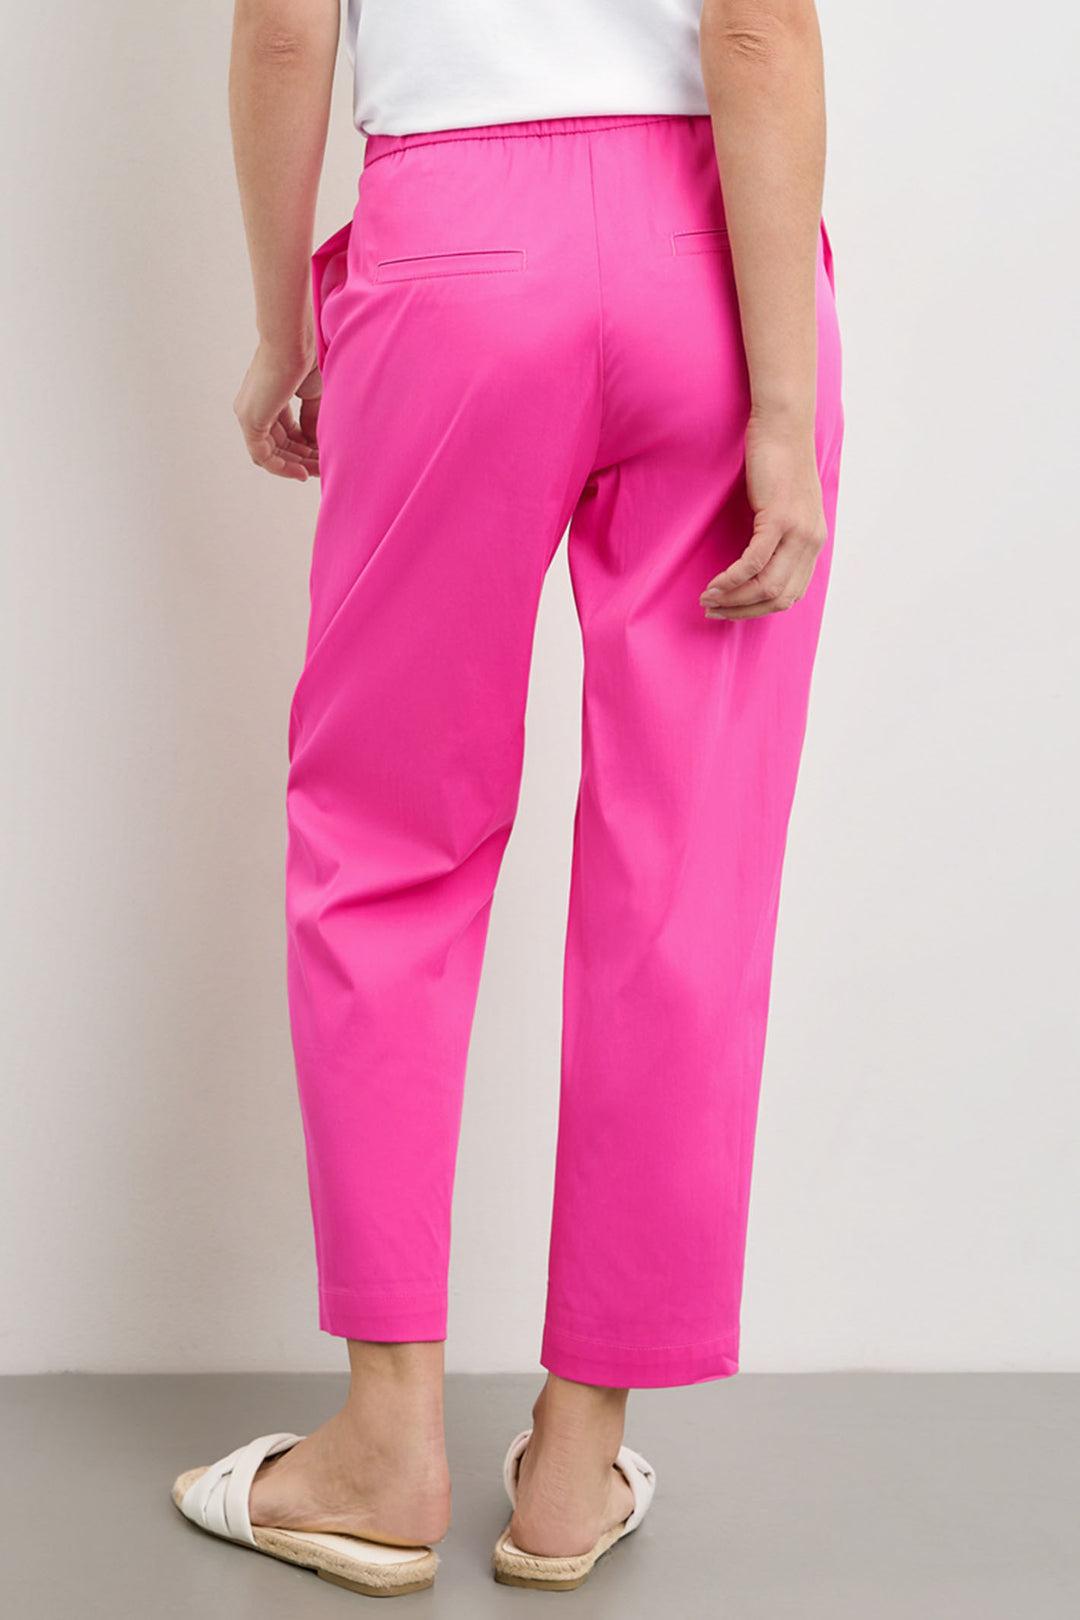 Gerry Weber 222069 Solar Pink Pull-On Trousers - Experience Boutique